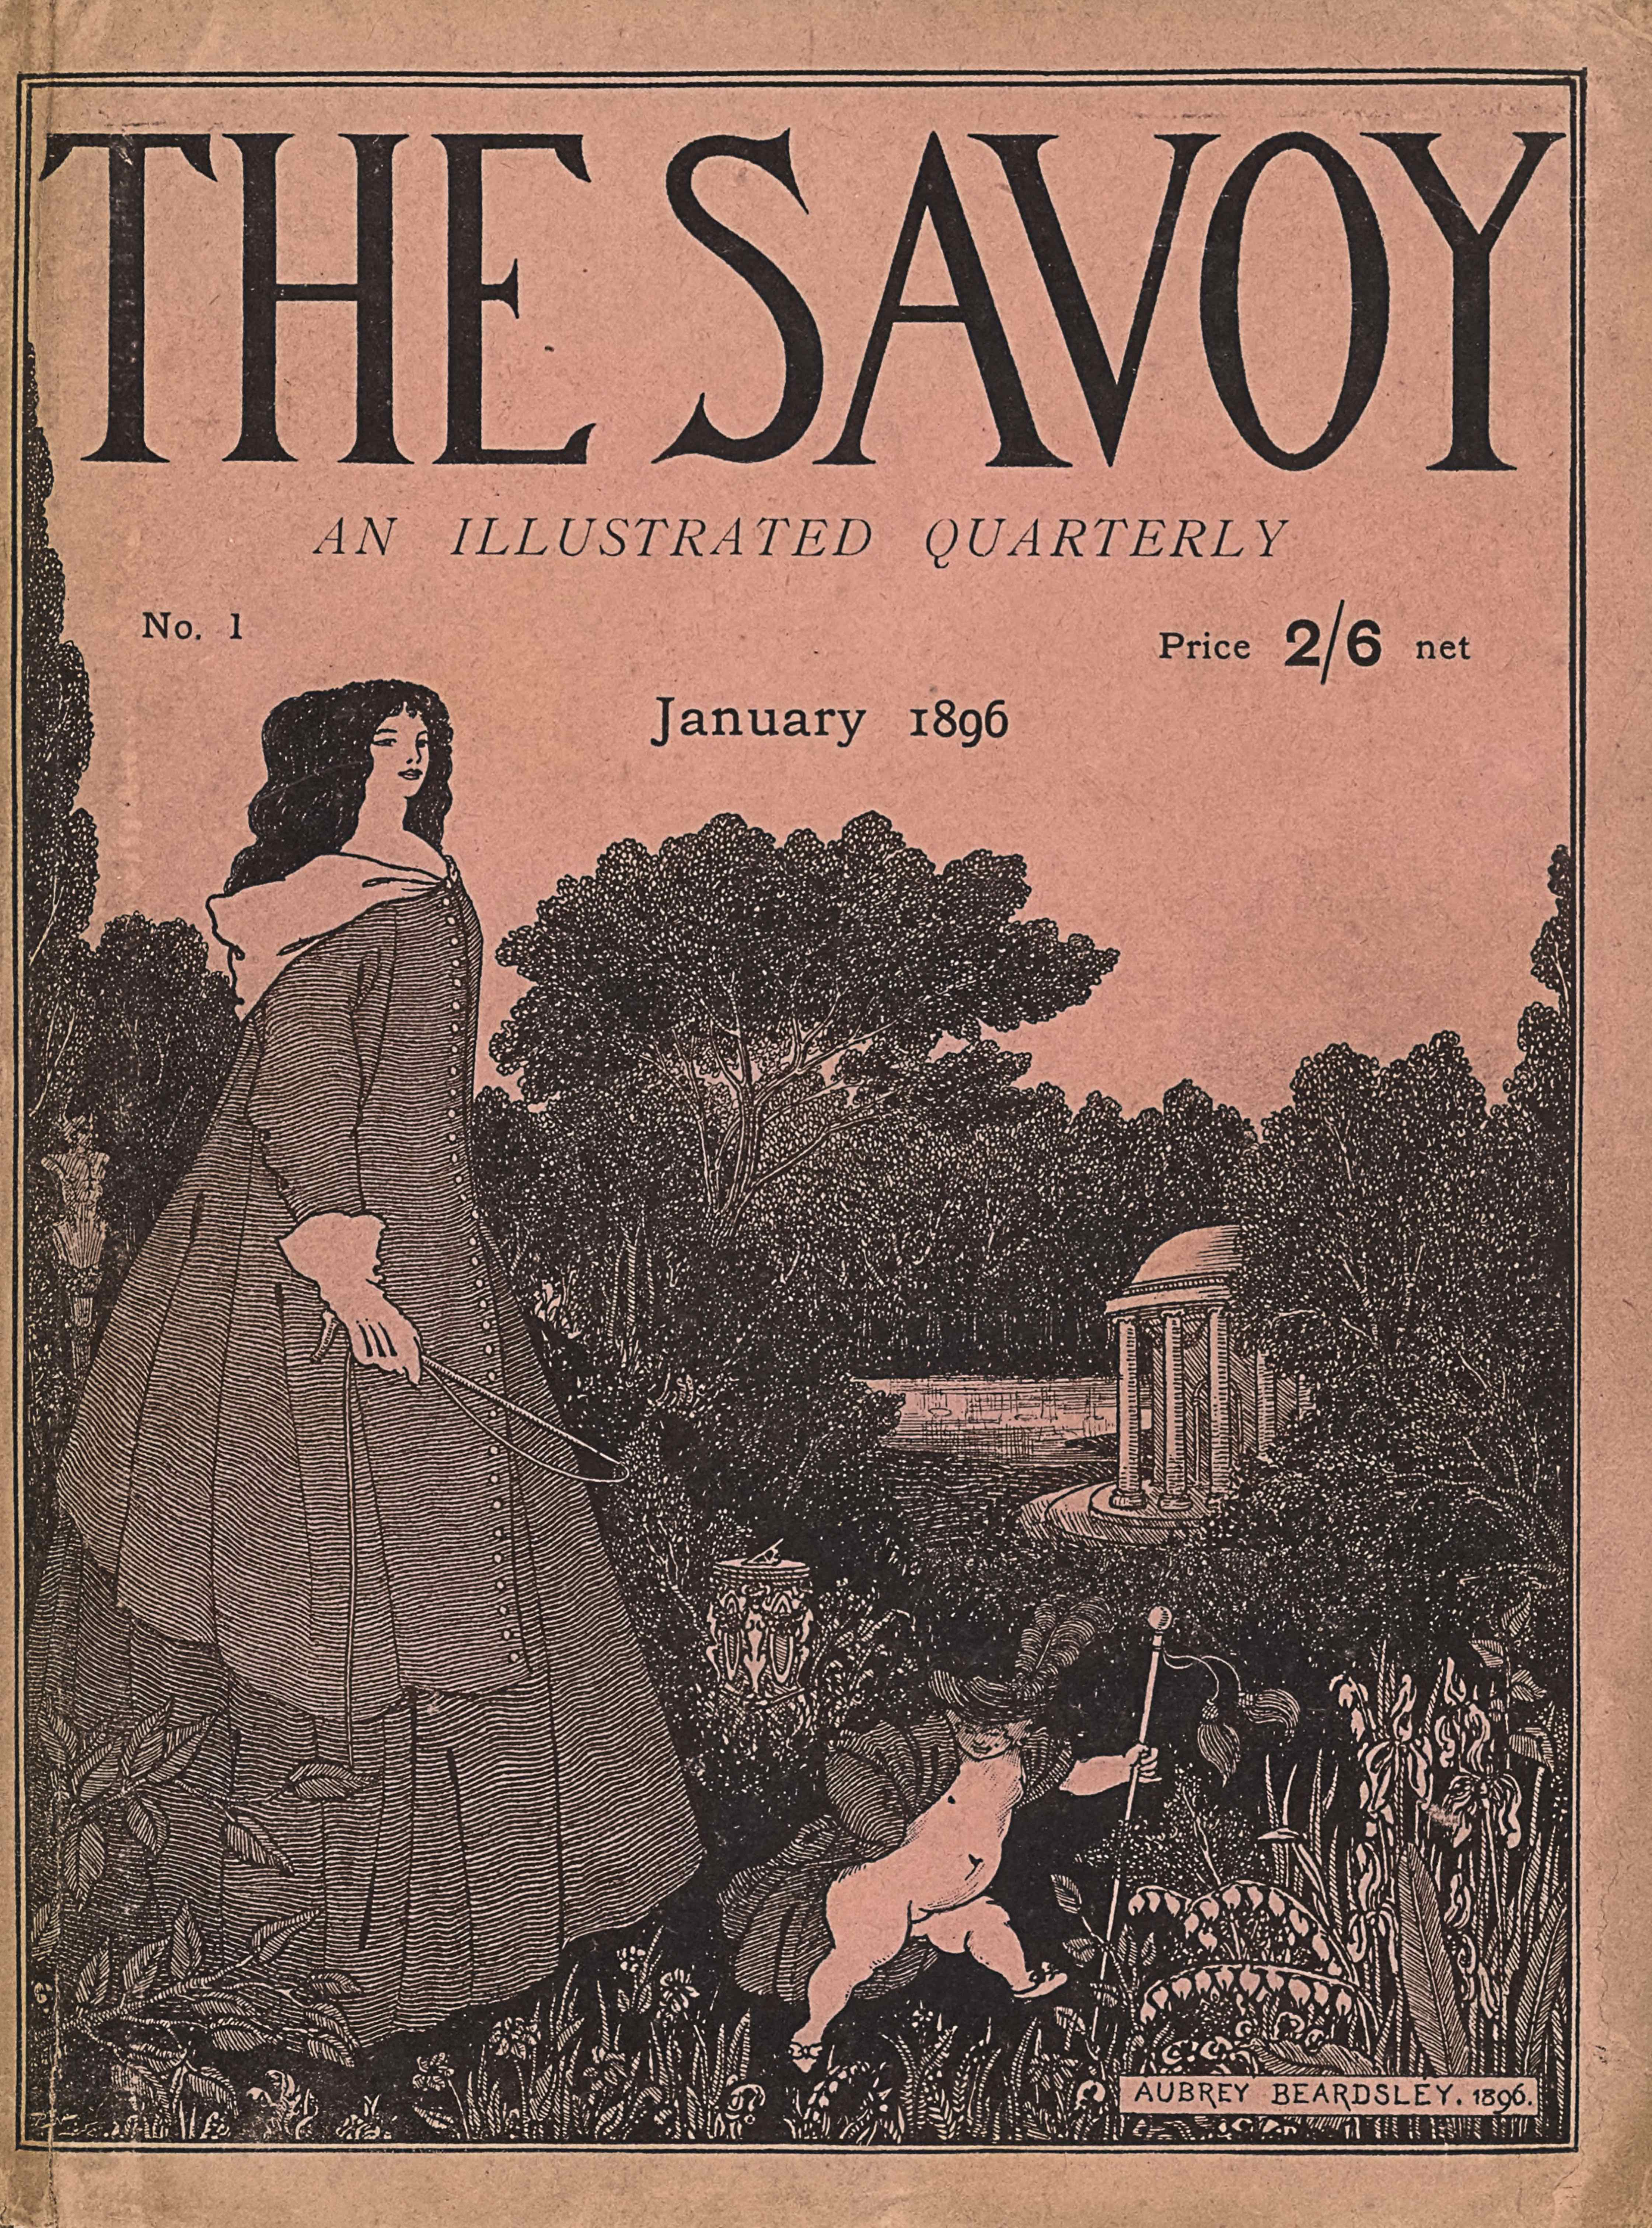 The cover image, in portrait orientation, combines a line-block reproduction of a pen-and-ink design with letterpress. The title: “THE SAVOY” [caps] appears in the top quarter of the page, with the text “AN ILLUSTRATED QUARTERLY” [caps, italics] centered below. One row down the text “No. 1” is aligned on the left side, with the text “Price 2/6 net” in the same line but aligned to the right. Centered in the line below is the text “January 1896.” A tall woman stands in the bottom left foreground, rising up two-thirds of the page to meet the bottom of the title. She is turned to the right and her face appears in two-thirds profile. She is dressed in a full-length gown with horizontal stripes and an overcoat with buttons of the same material on top. She has a white hood attached to her overcoat and dark voluminous hair worn down around her face. In her white-gloved hand is a riding crop at rest. In the central foreground a putto, or young cherub-like boy, appears naked apart from a striped overcoat, plumed hat, and bowed slippers. He is turned to the right with a hand on his hip and his other hand holding a tasseled staff that is taller than he is. Flowers and plants grow up along the bottom edge of the page in the foremost ground. A herm or male statue body stands to the left and in the background of the woman. An ornamented sundial sits in the mid-ground behind the putto. A tree protrudes taller than the rest of the forest in the central background. A pond is just in front of the forest in the mid-ground, with a Stowe rotunda emerging halfway behind trees to the right of the pond. The signature “AUBREY BEARDSLEY, 1896.” [caps] appears in the bottom right corner of the page, within a rectangular box. The page is surrounded by a double-lined rectangle.